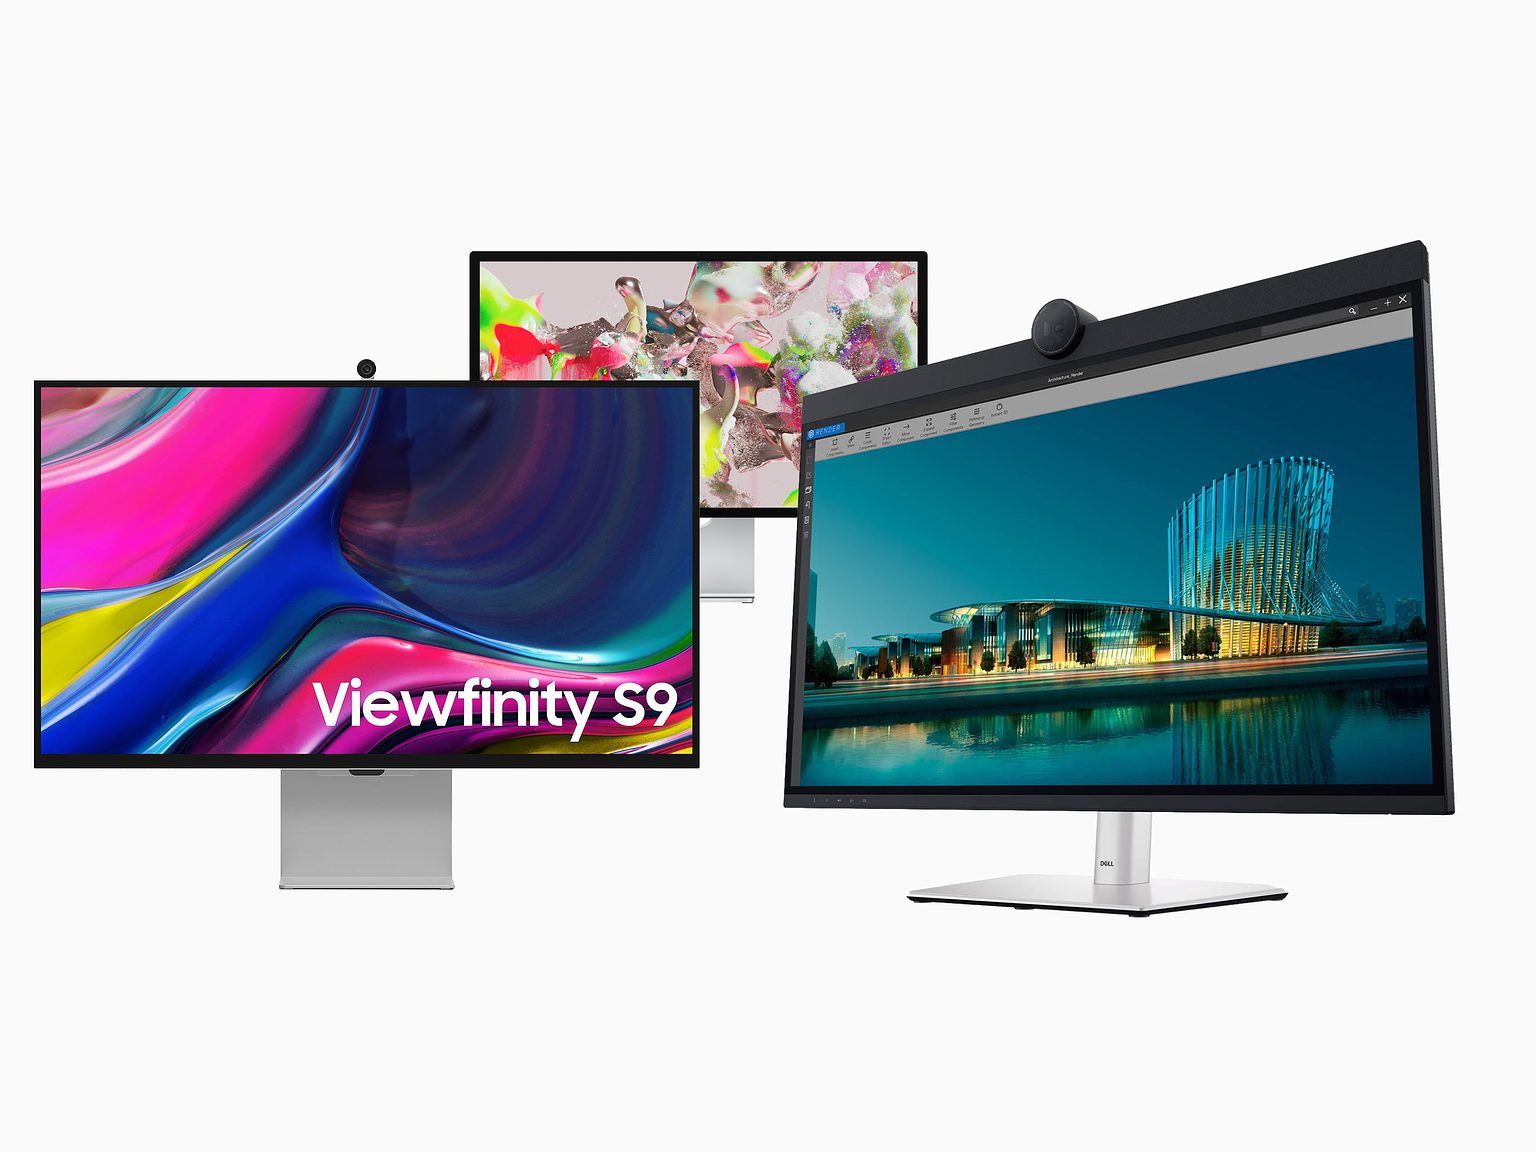 Left to right: The Samsung ViewFinity S9, Apple Studio Display and Dell UltraSharp 32.